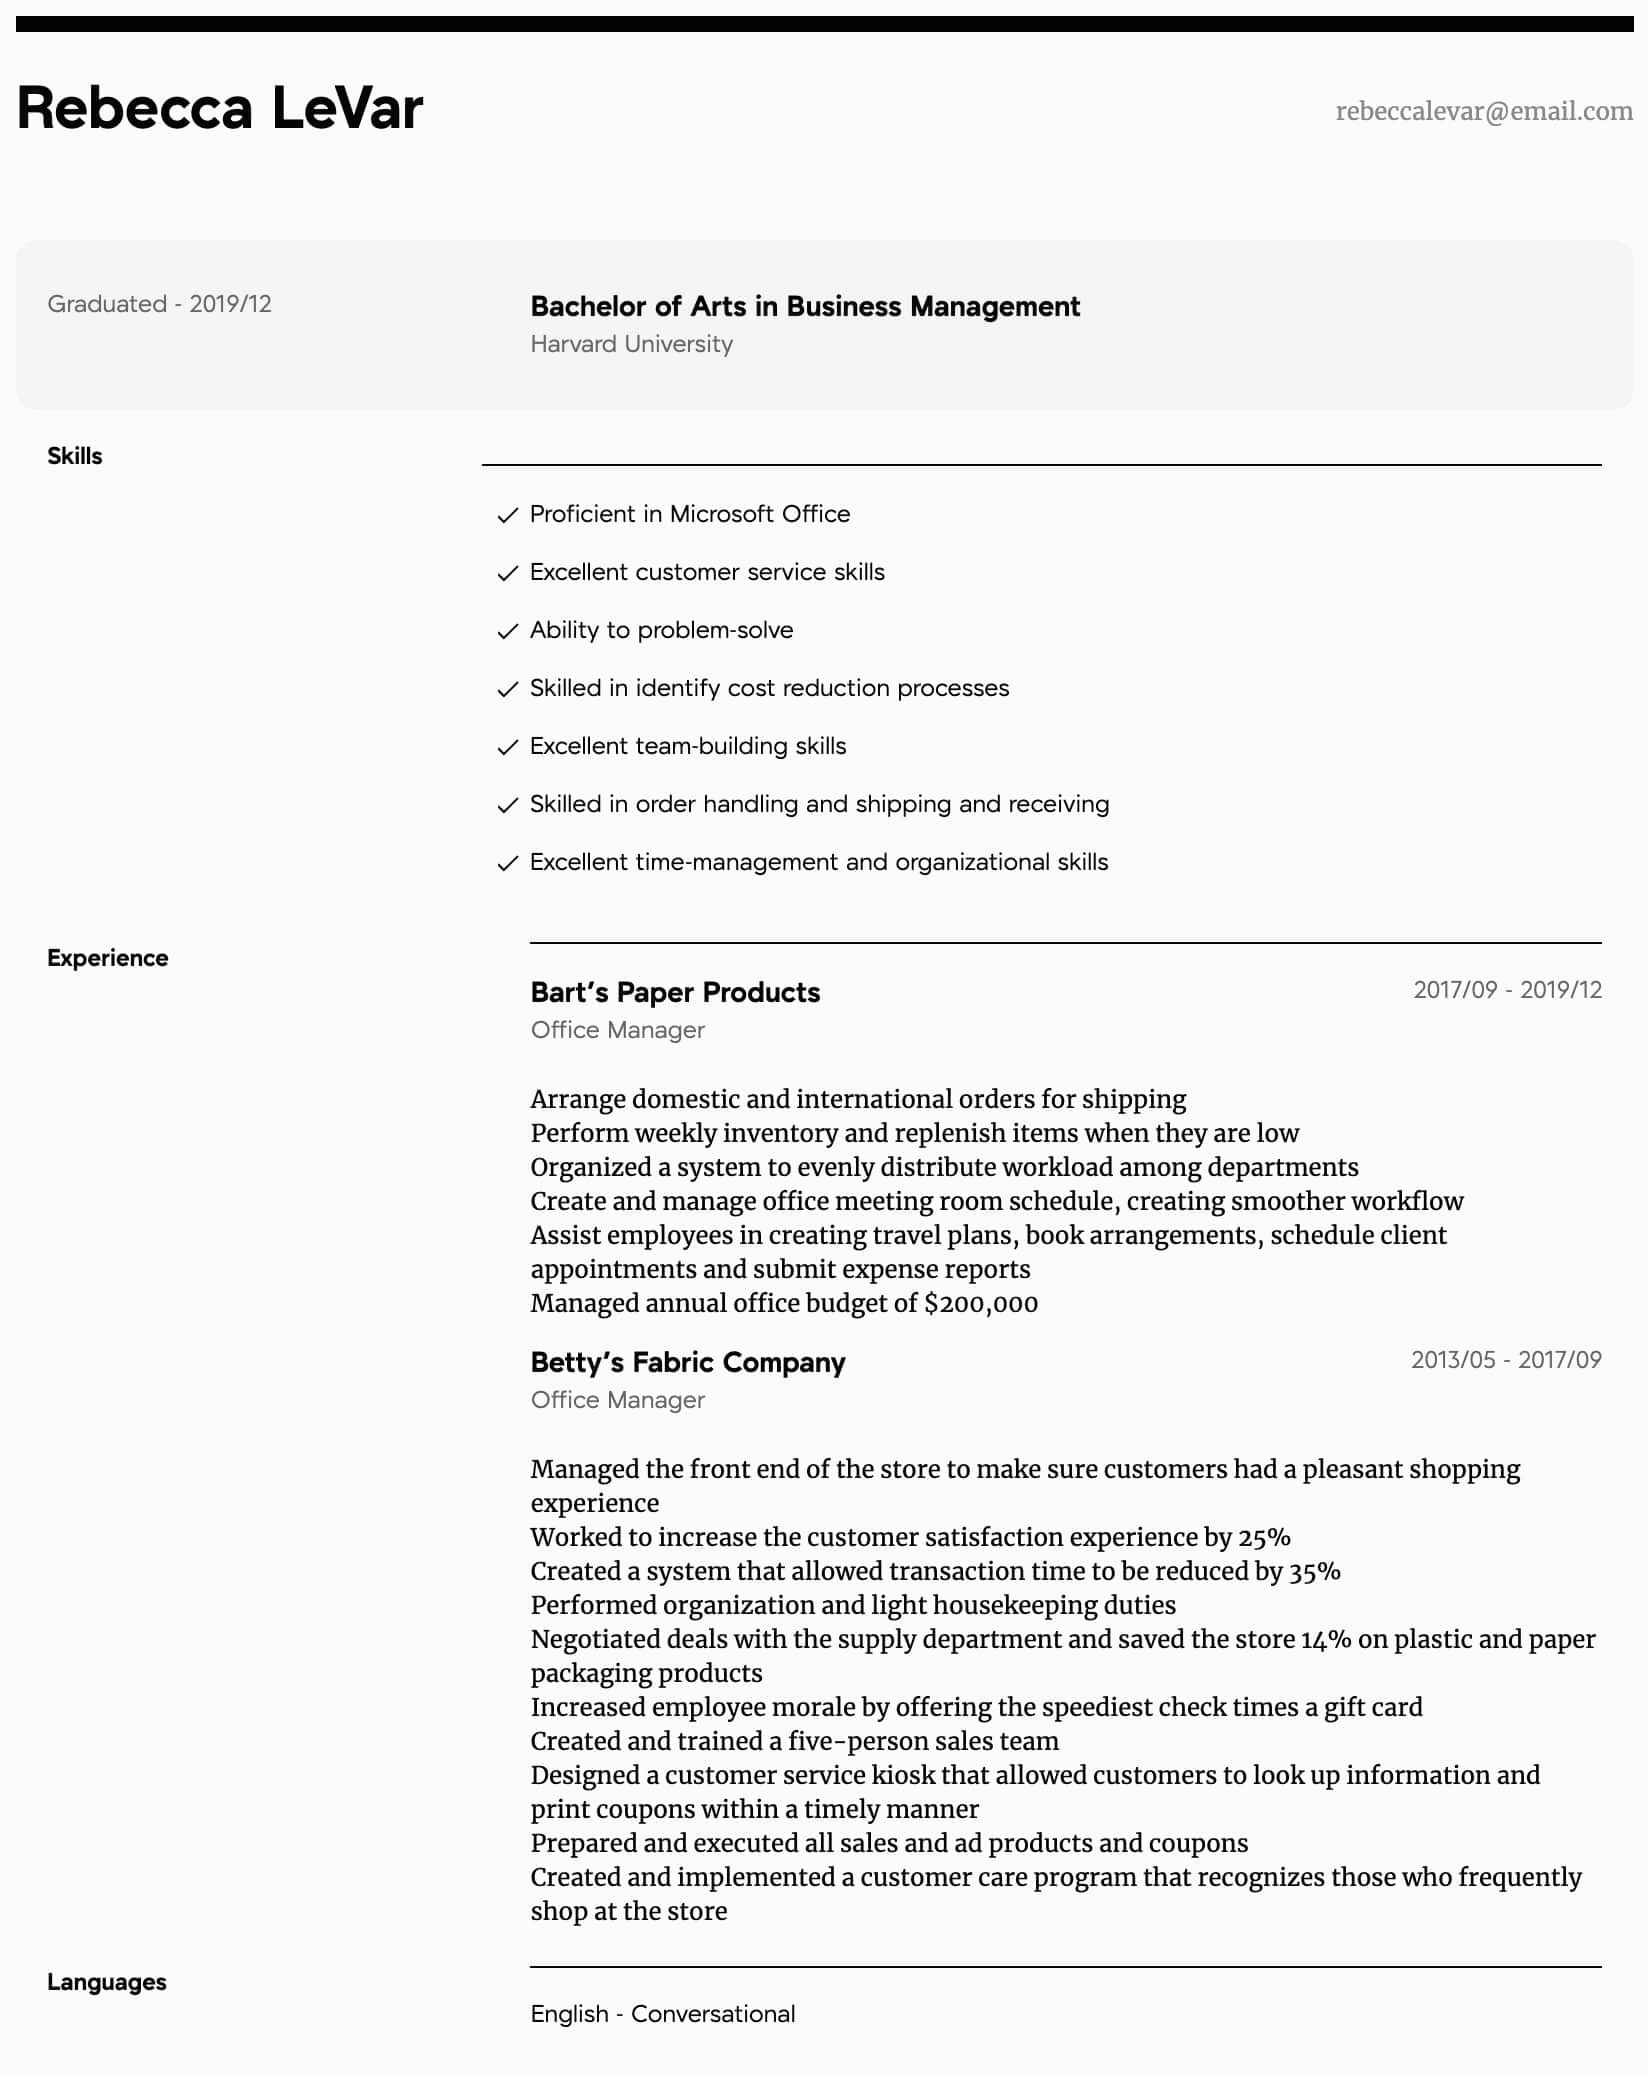 Resume Sample for An Experienced Office Manager Fice Manager Resume Samples All Experience Levels